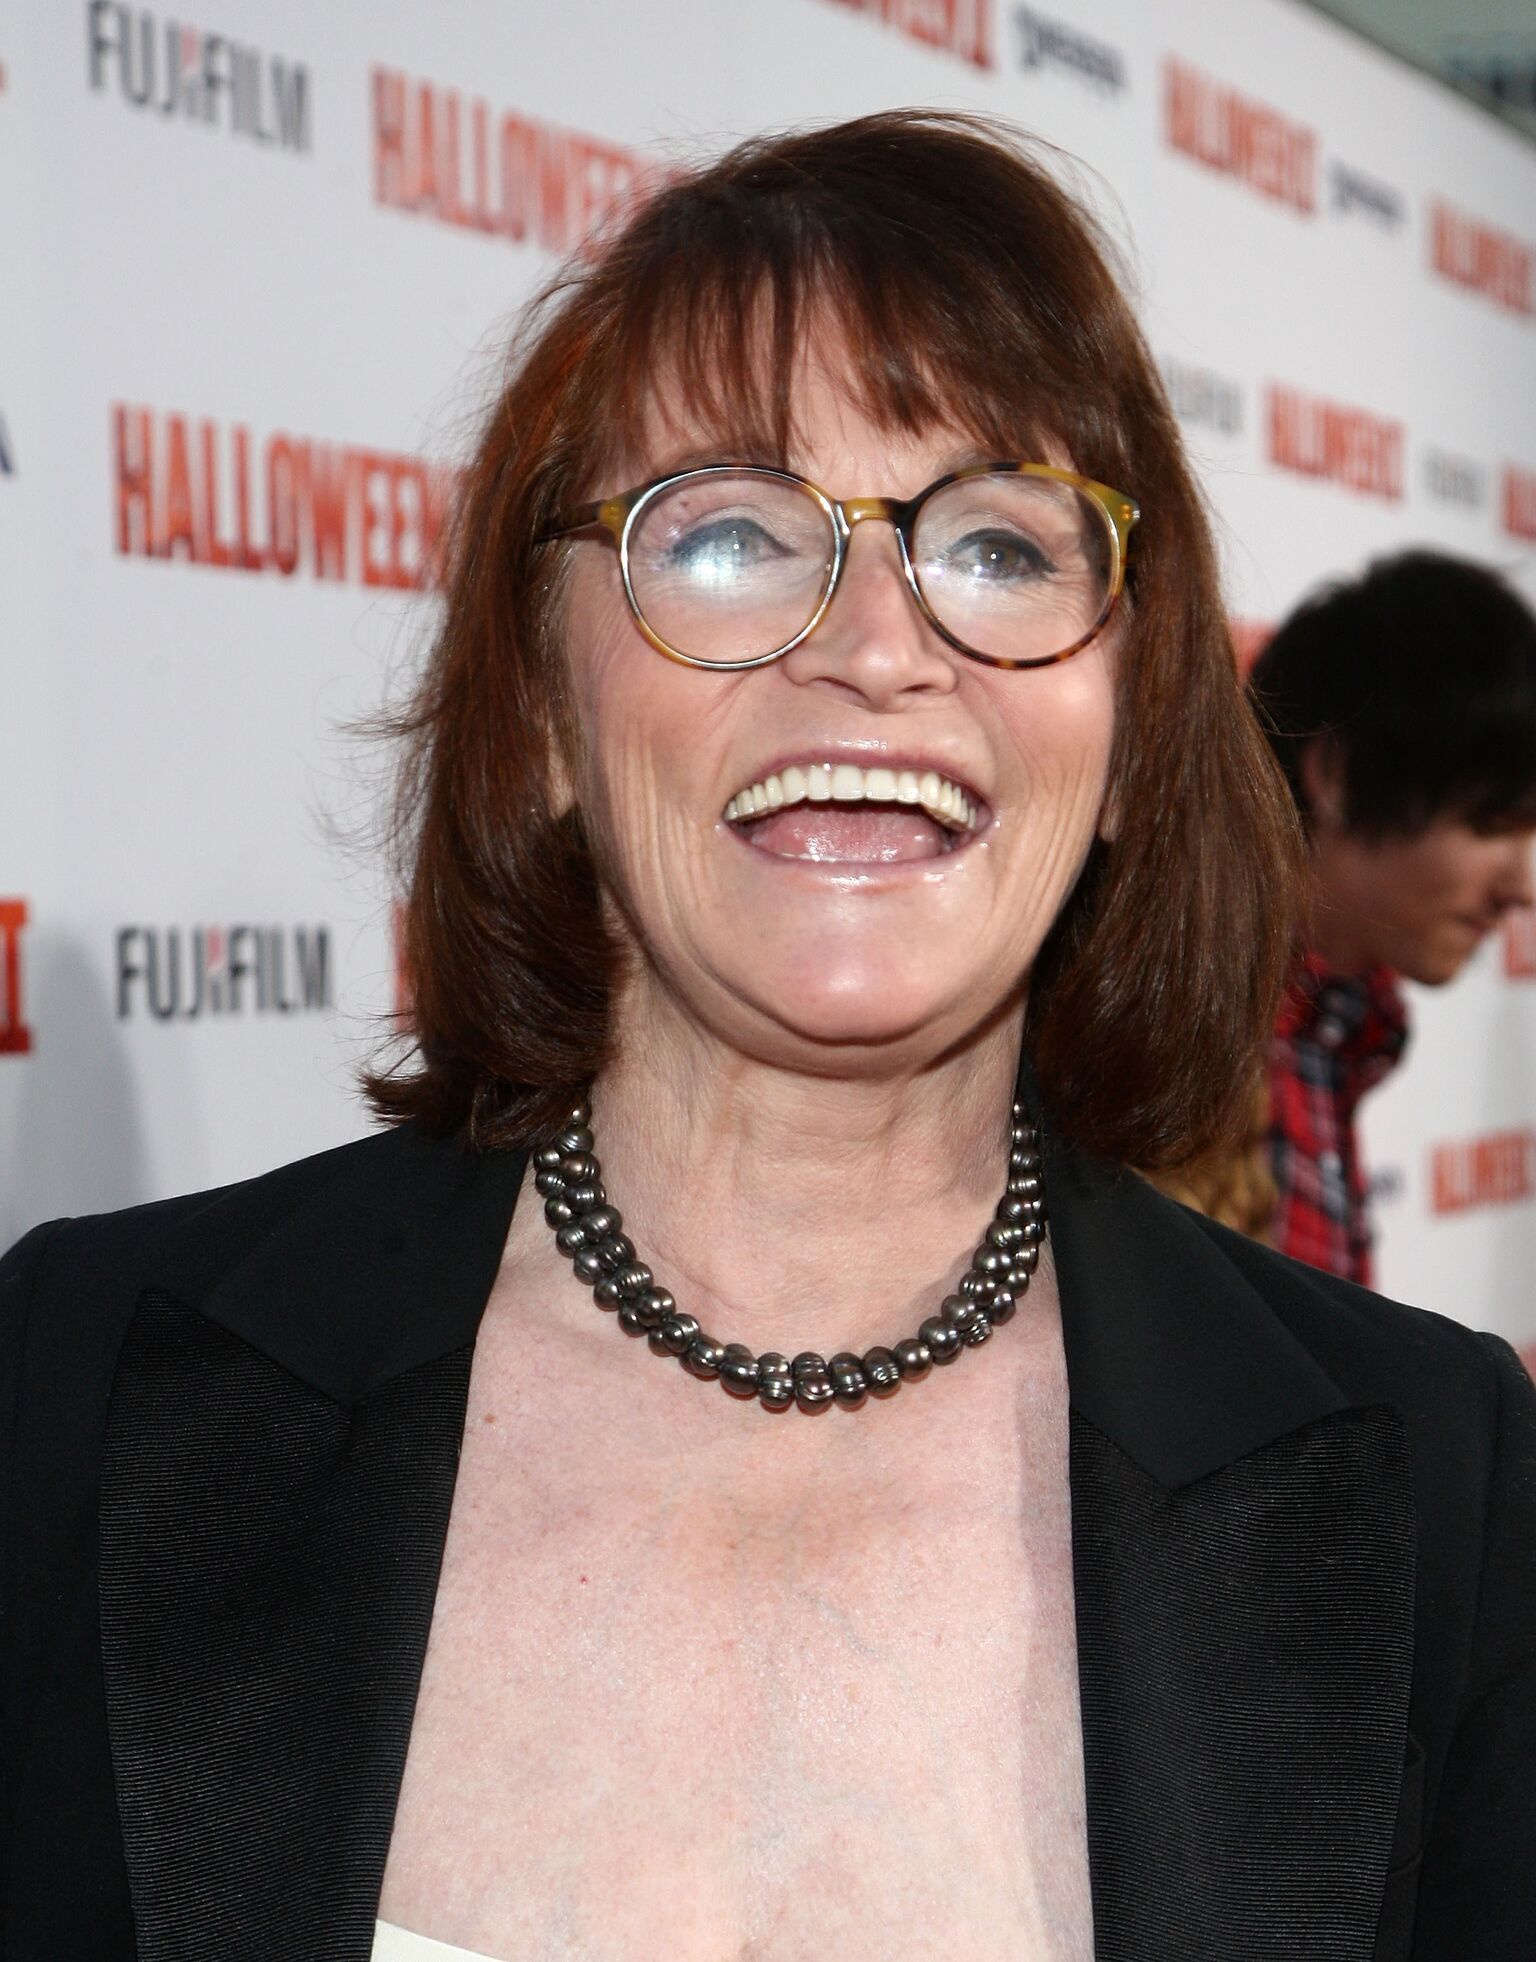 Actress Margot Kidder arrives at the premiere of Dimension Films' "Halloween II" held at Grauman's Chinese Theater  | Getty Images